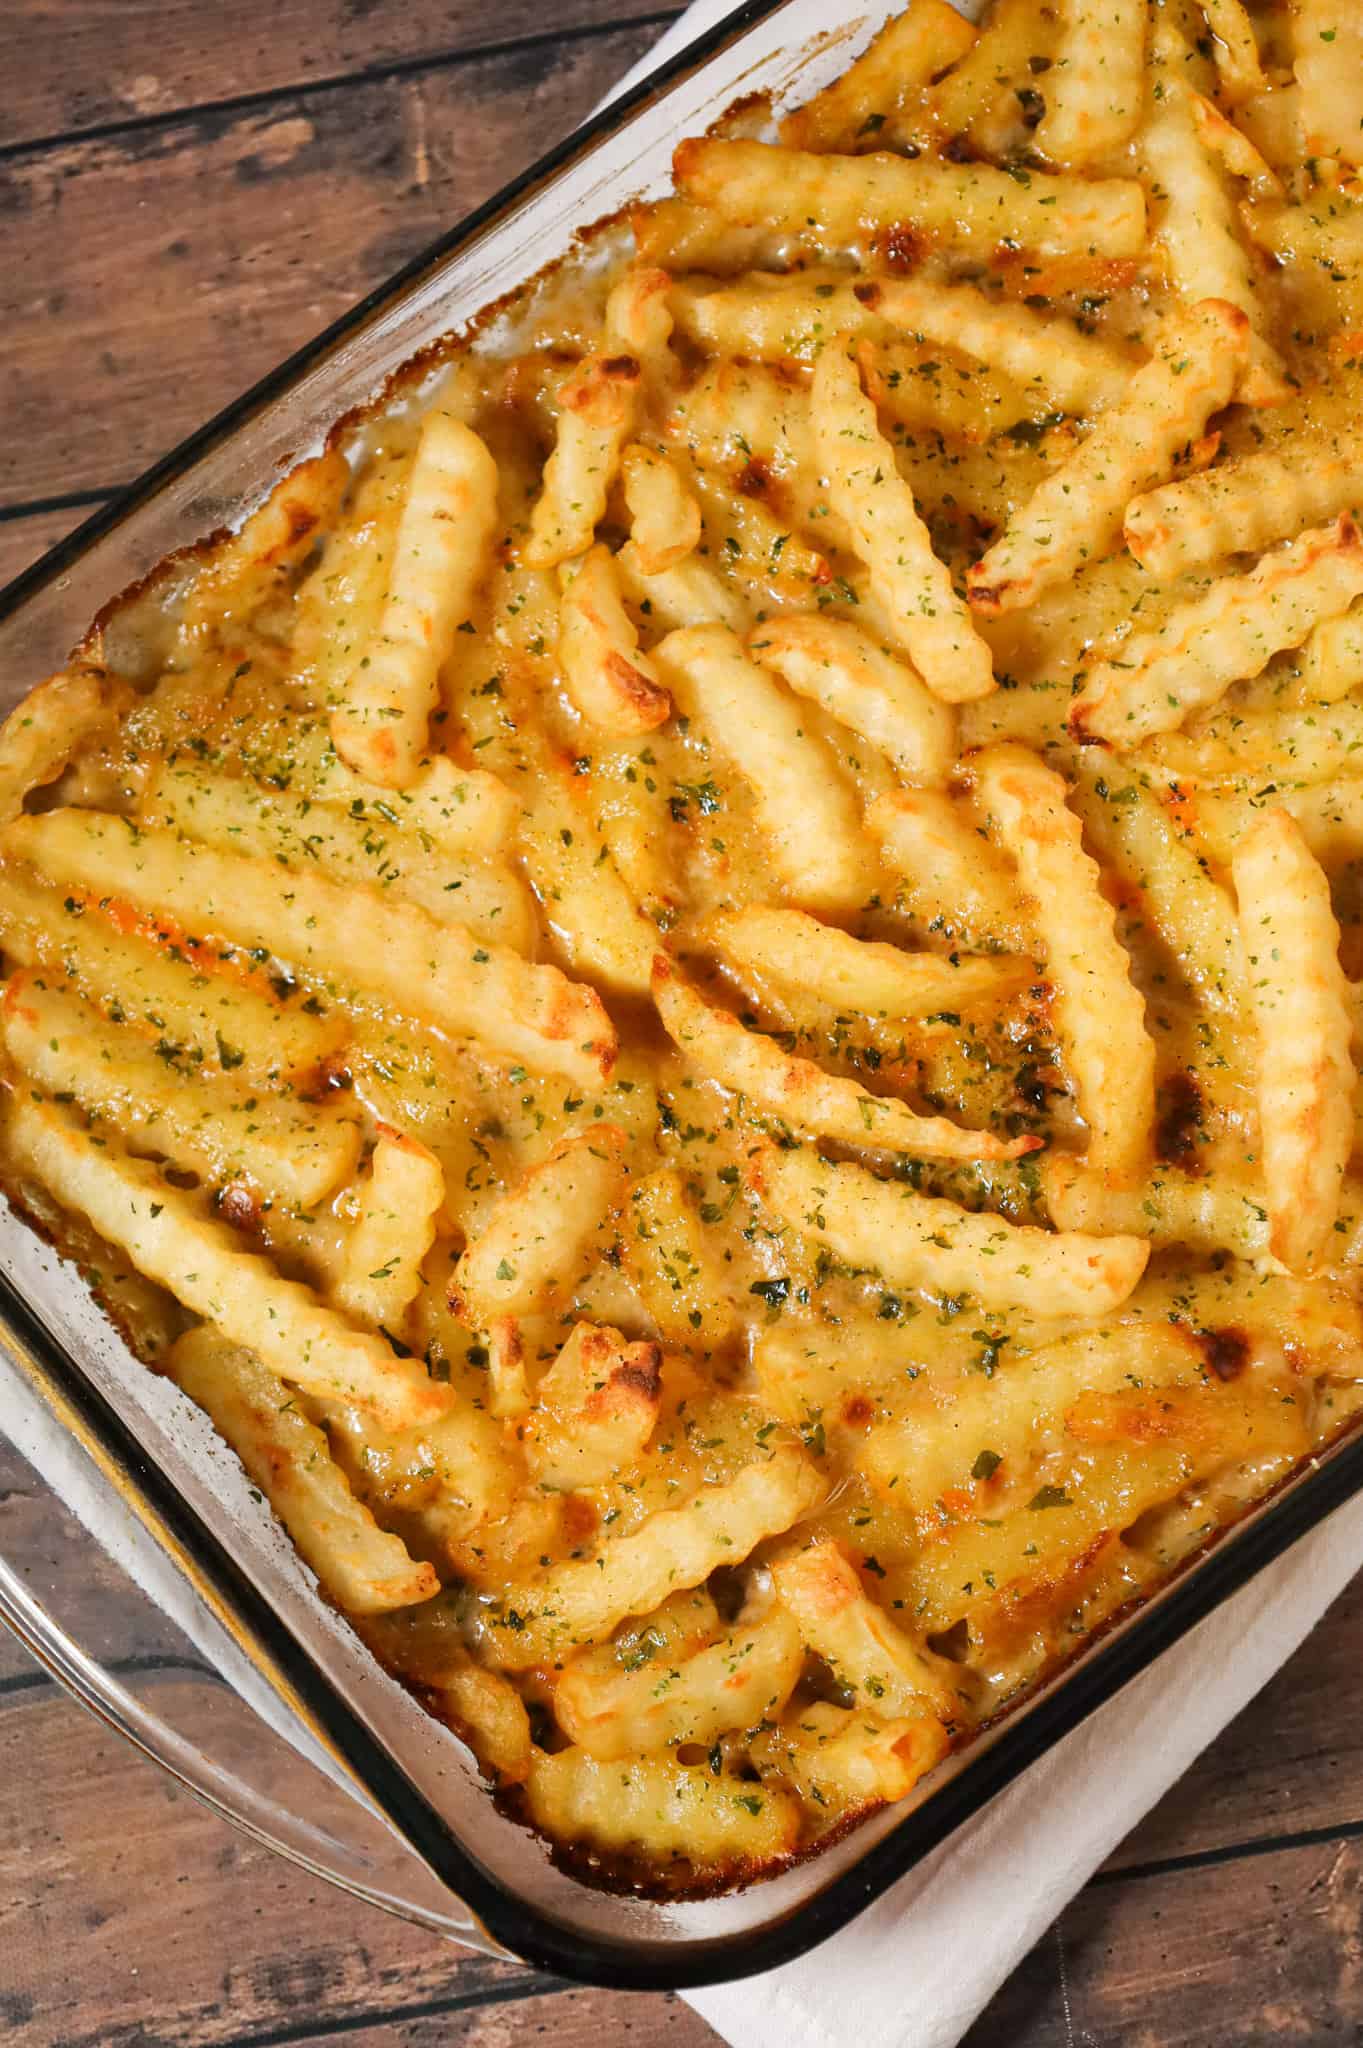 French Fry Casserole is a hearty ground beef casserole made with cream of mushroom soup, cheddar soup, diced onions, green peppers and shredded cheese all topped with crinkle cut fries.